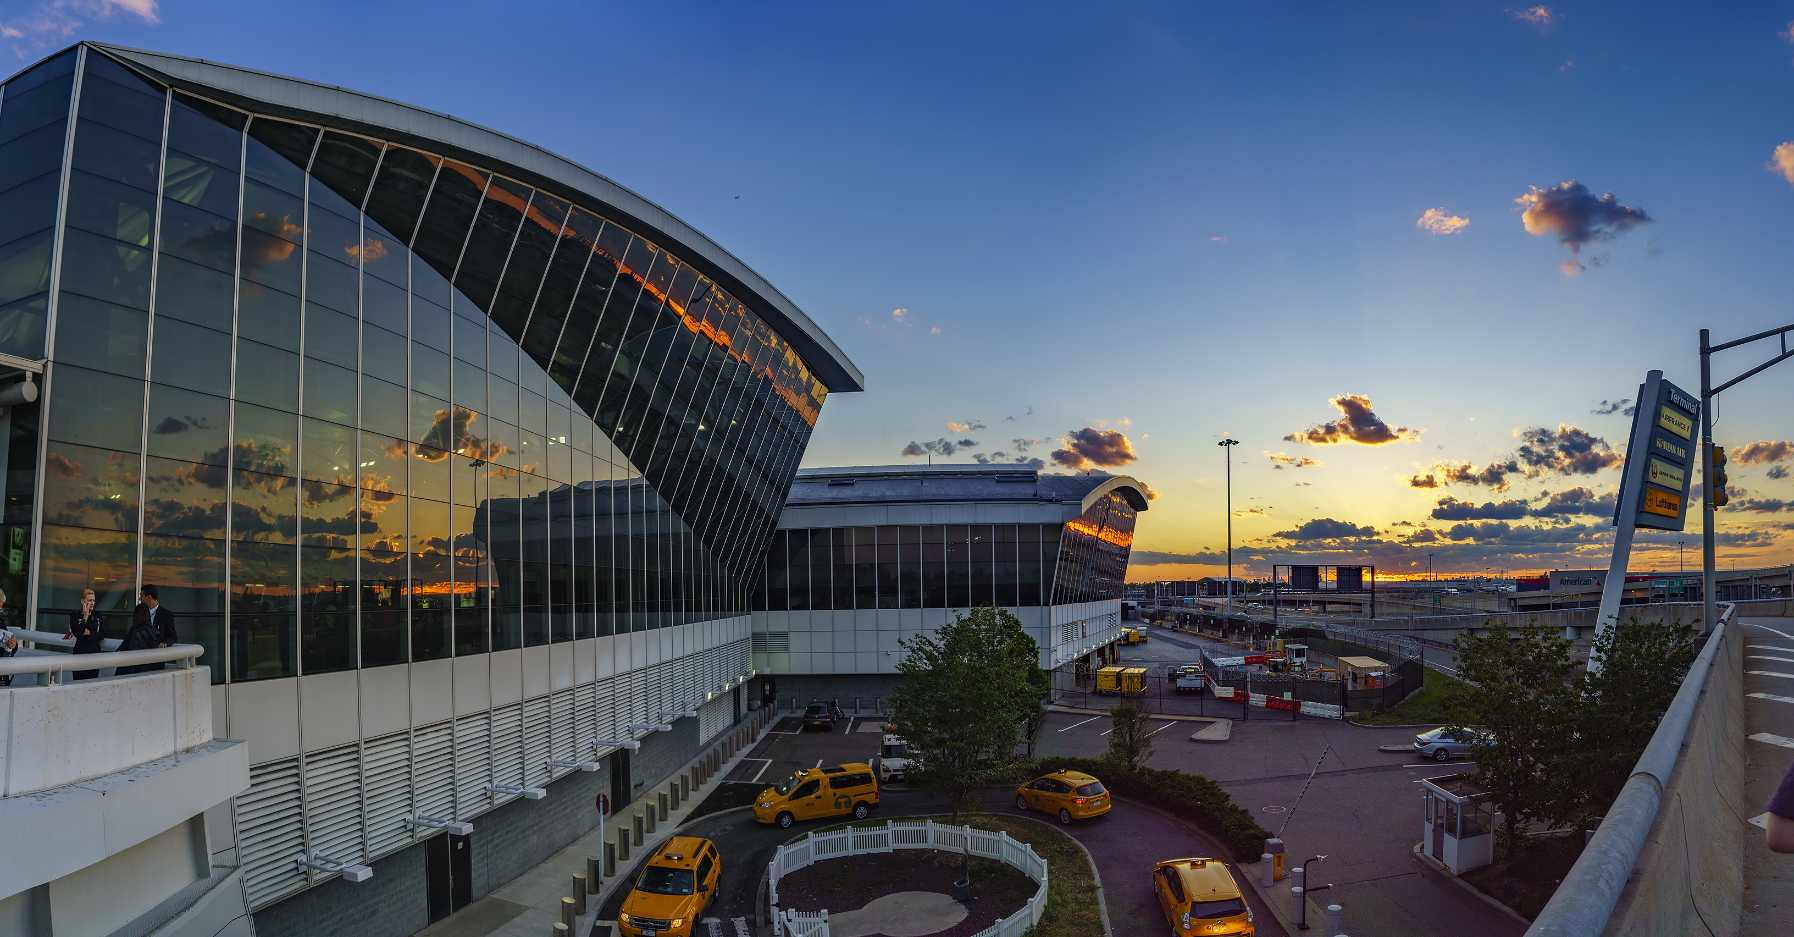 Jfk New Investments For The Nyc Airport We Build Value